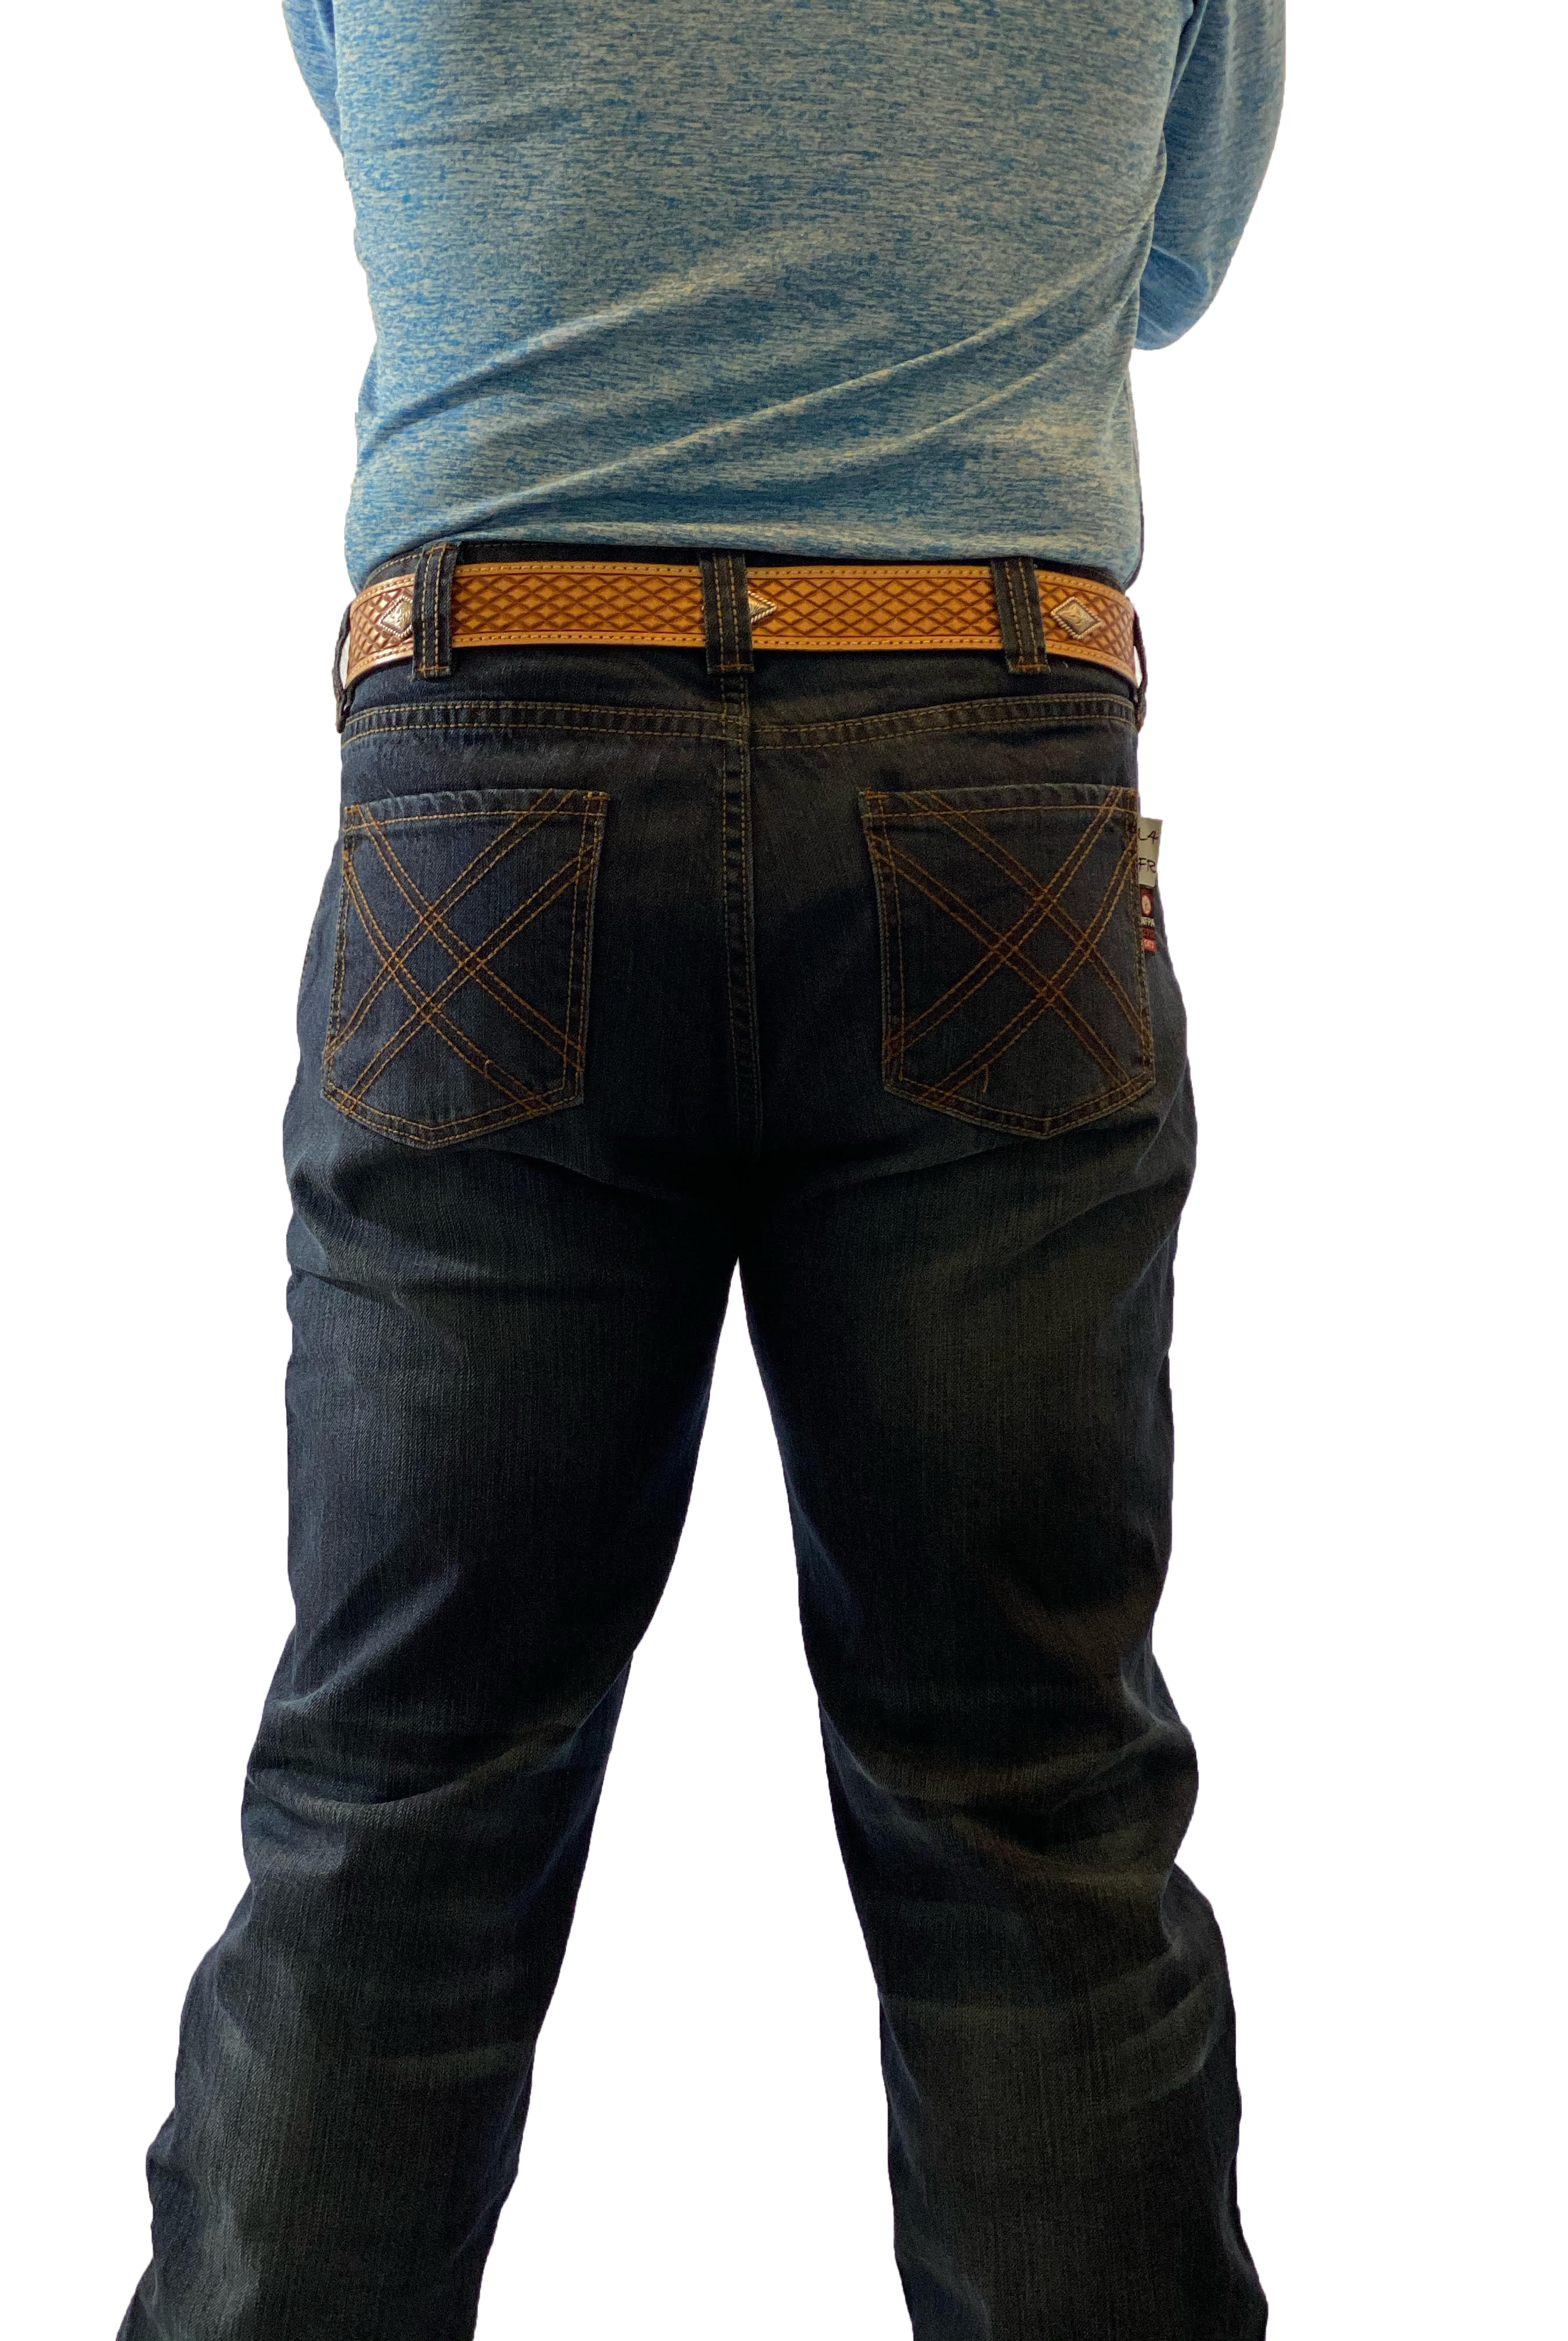 Man standing in B1 Relaxed fit jeans